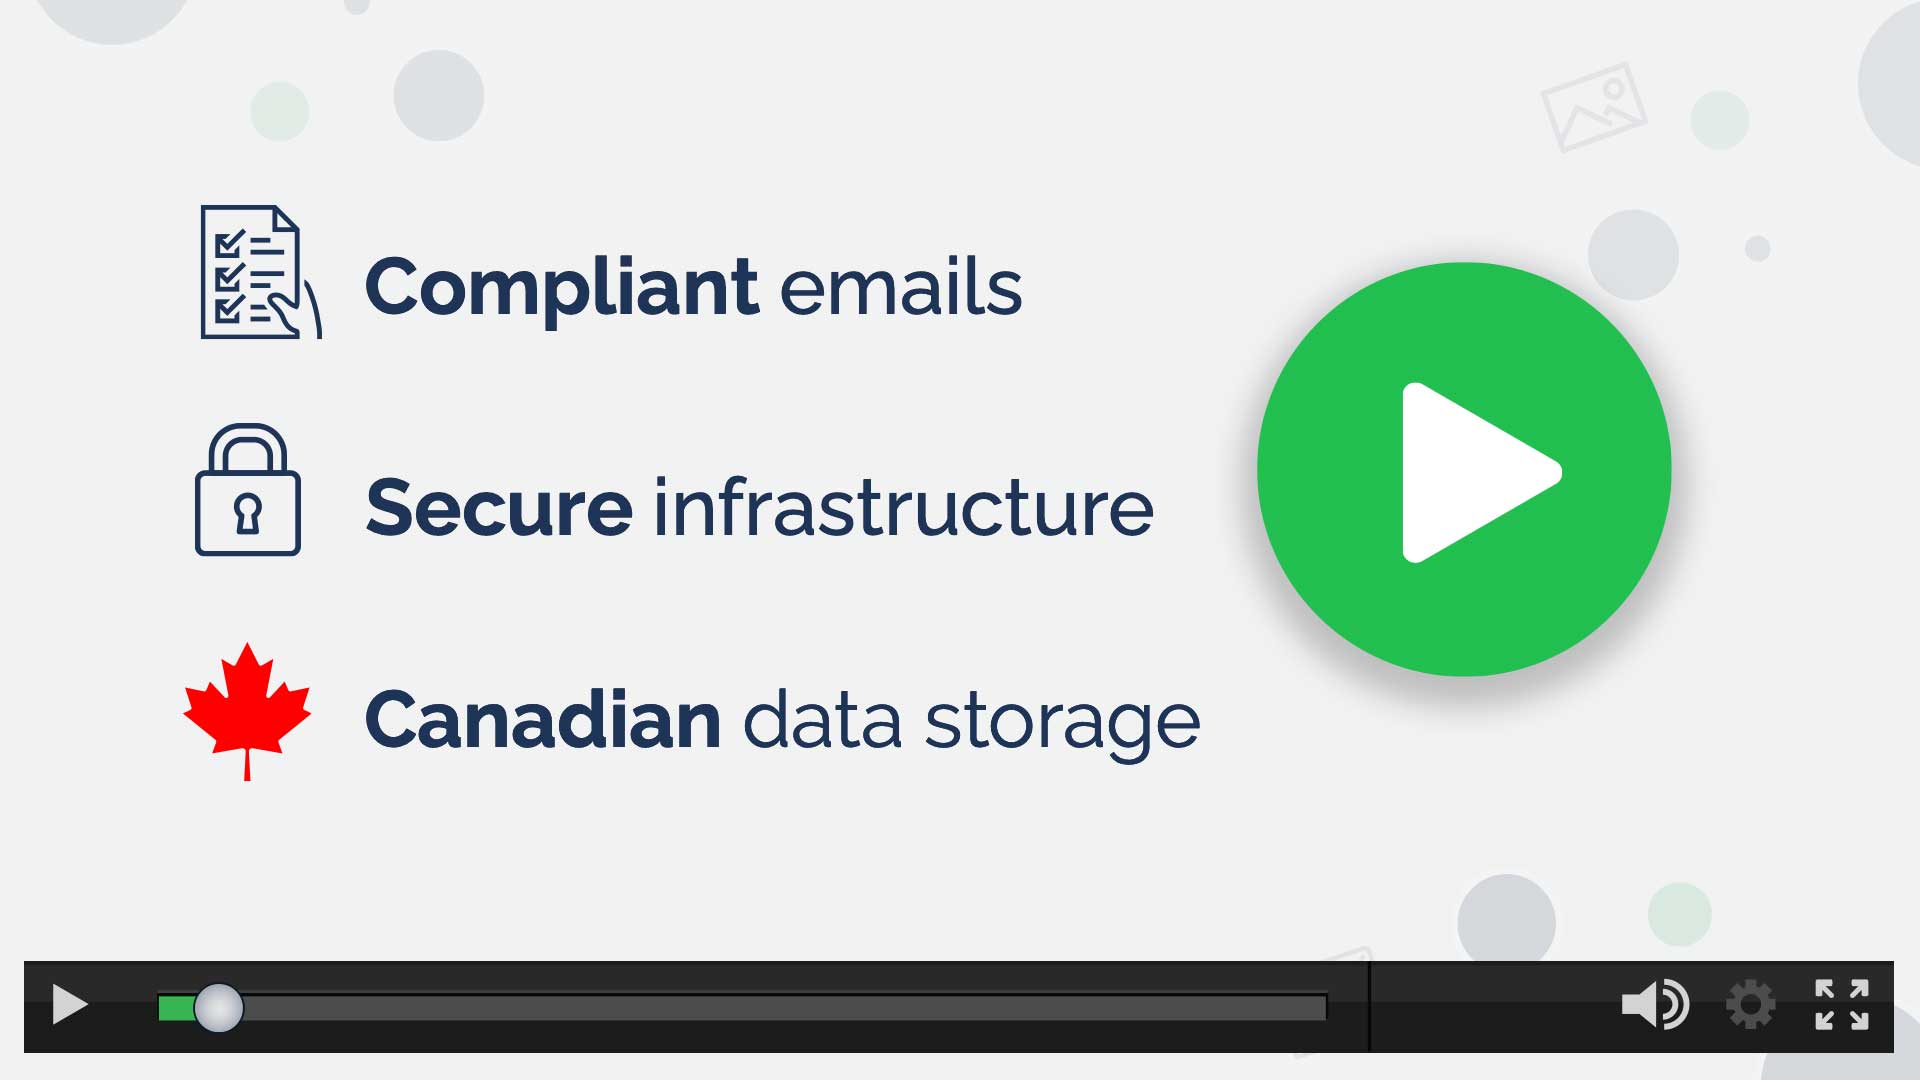 Envoke is a compliant and secure Canadian email marketing and communications software